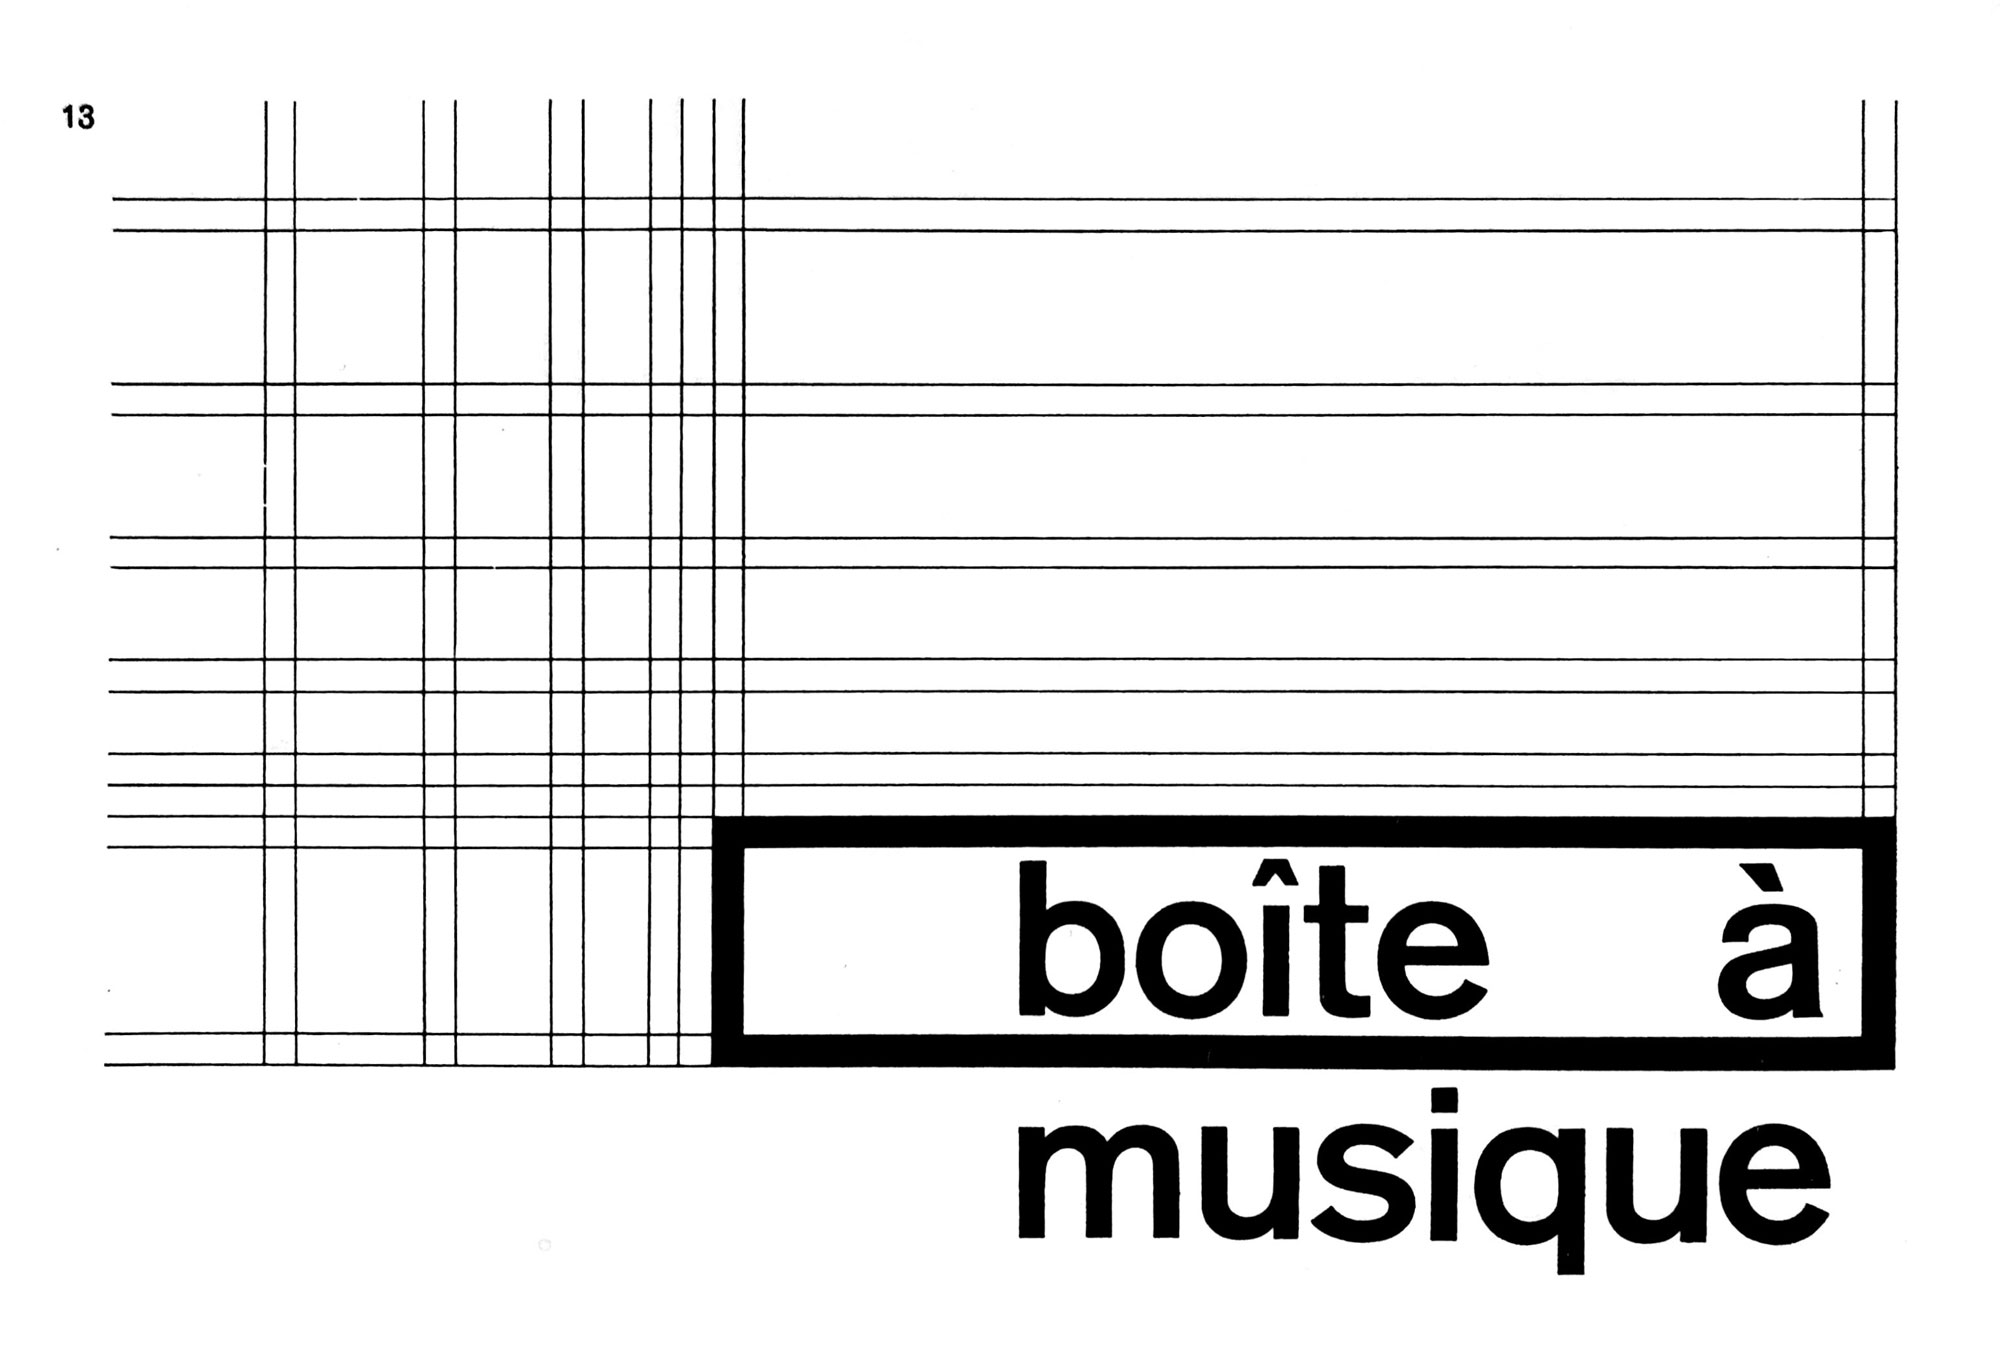 Boîte à musique typeset in a medium sans serif surrounded by a rectangle with criss-crossed grid guides showing the various layout options